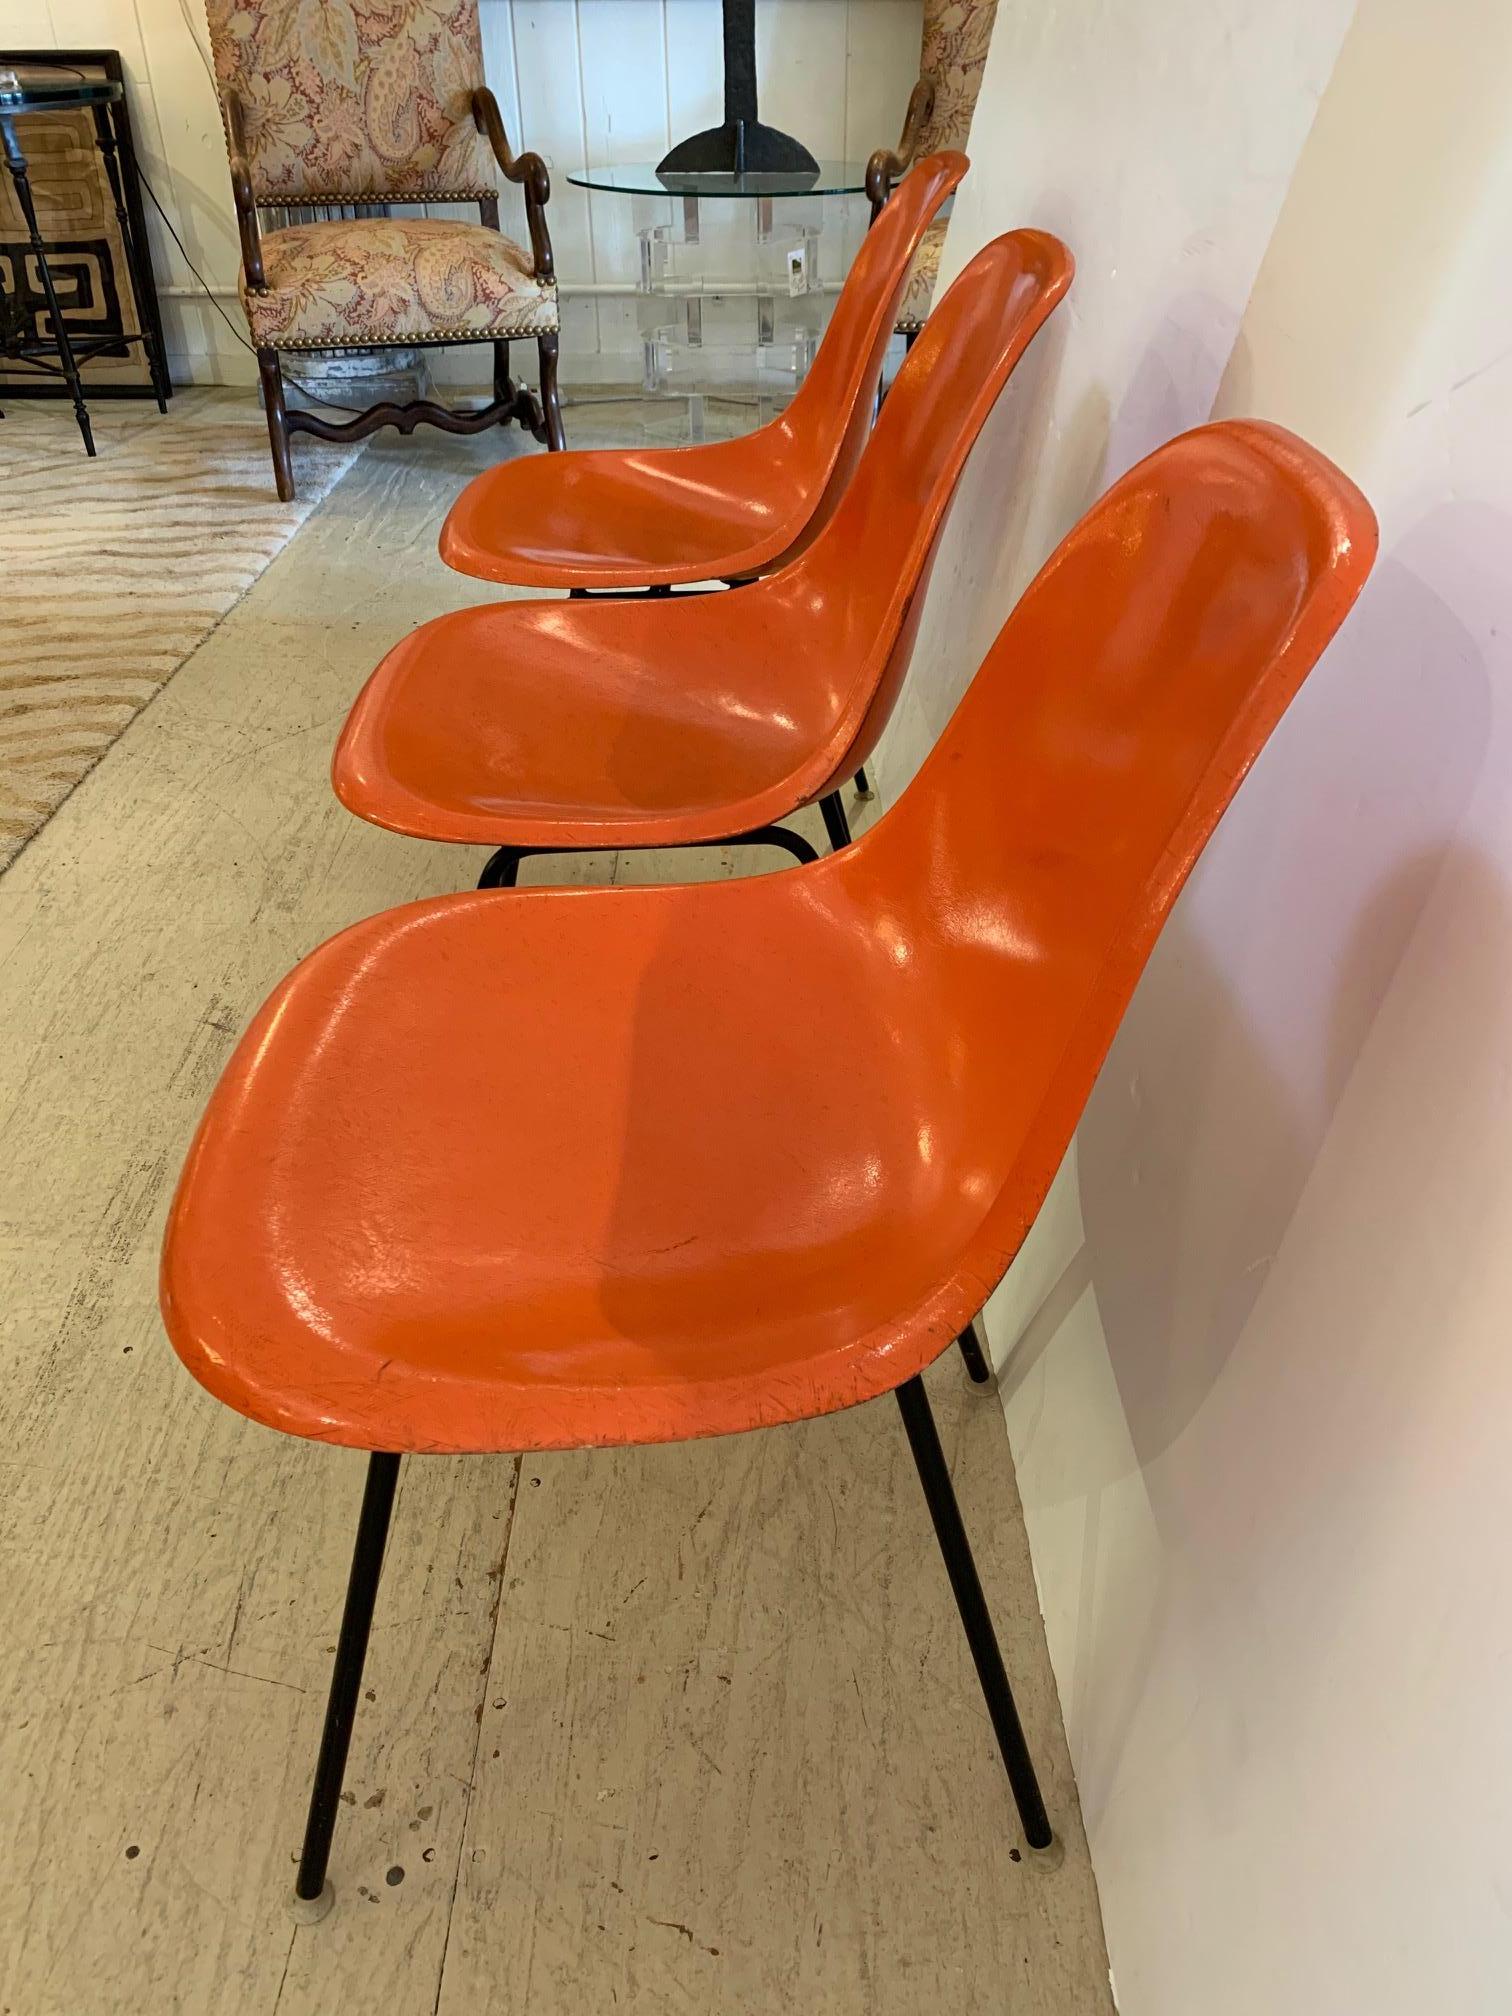 The Classic DSX fiberglass chair designed by Charles Eames for Herman Miller having a bright orange color and black H bases. Each shell is stamped with the Herman Miller emblem underneath.

Measures: Seat height 17.5
Seat depth 15.5.